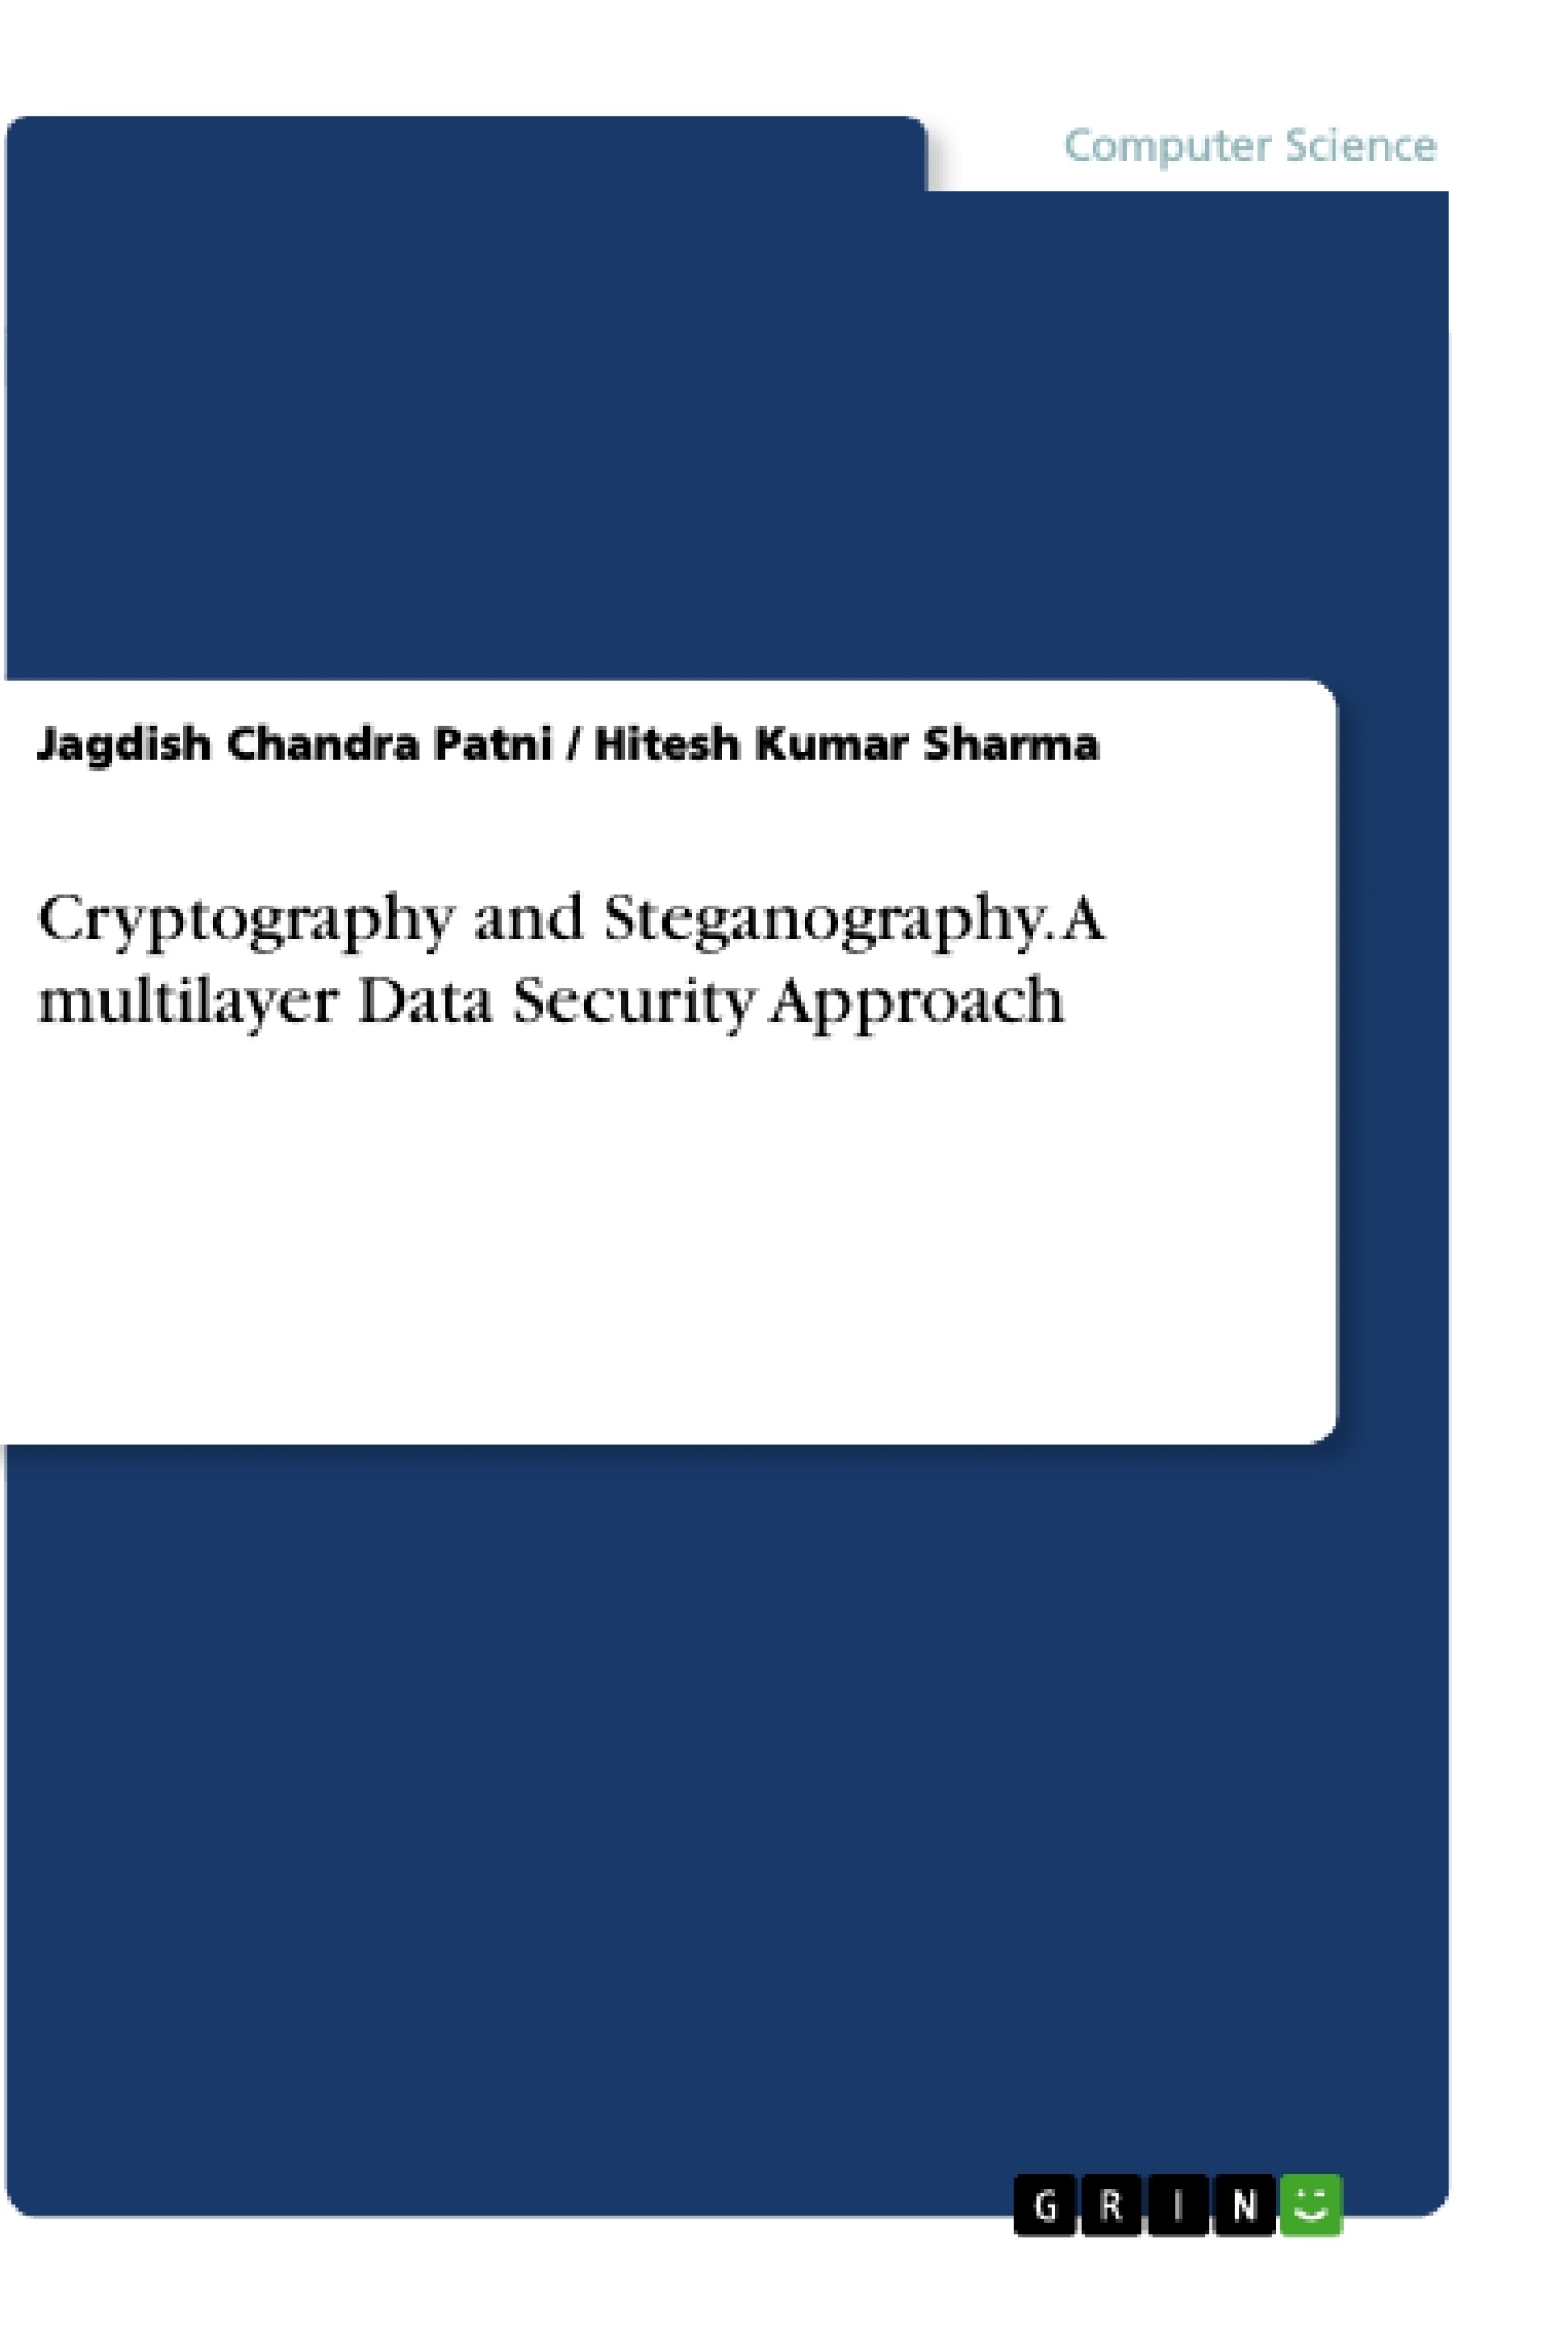 Titre: Cryptography and Steganography. A multilayer Data Security Approach